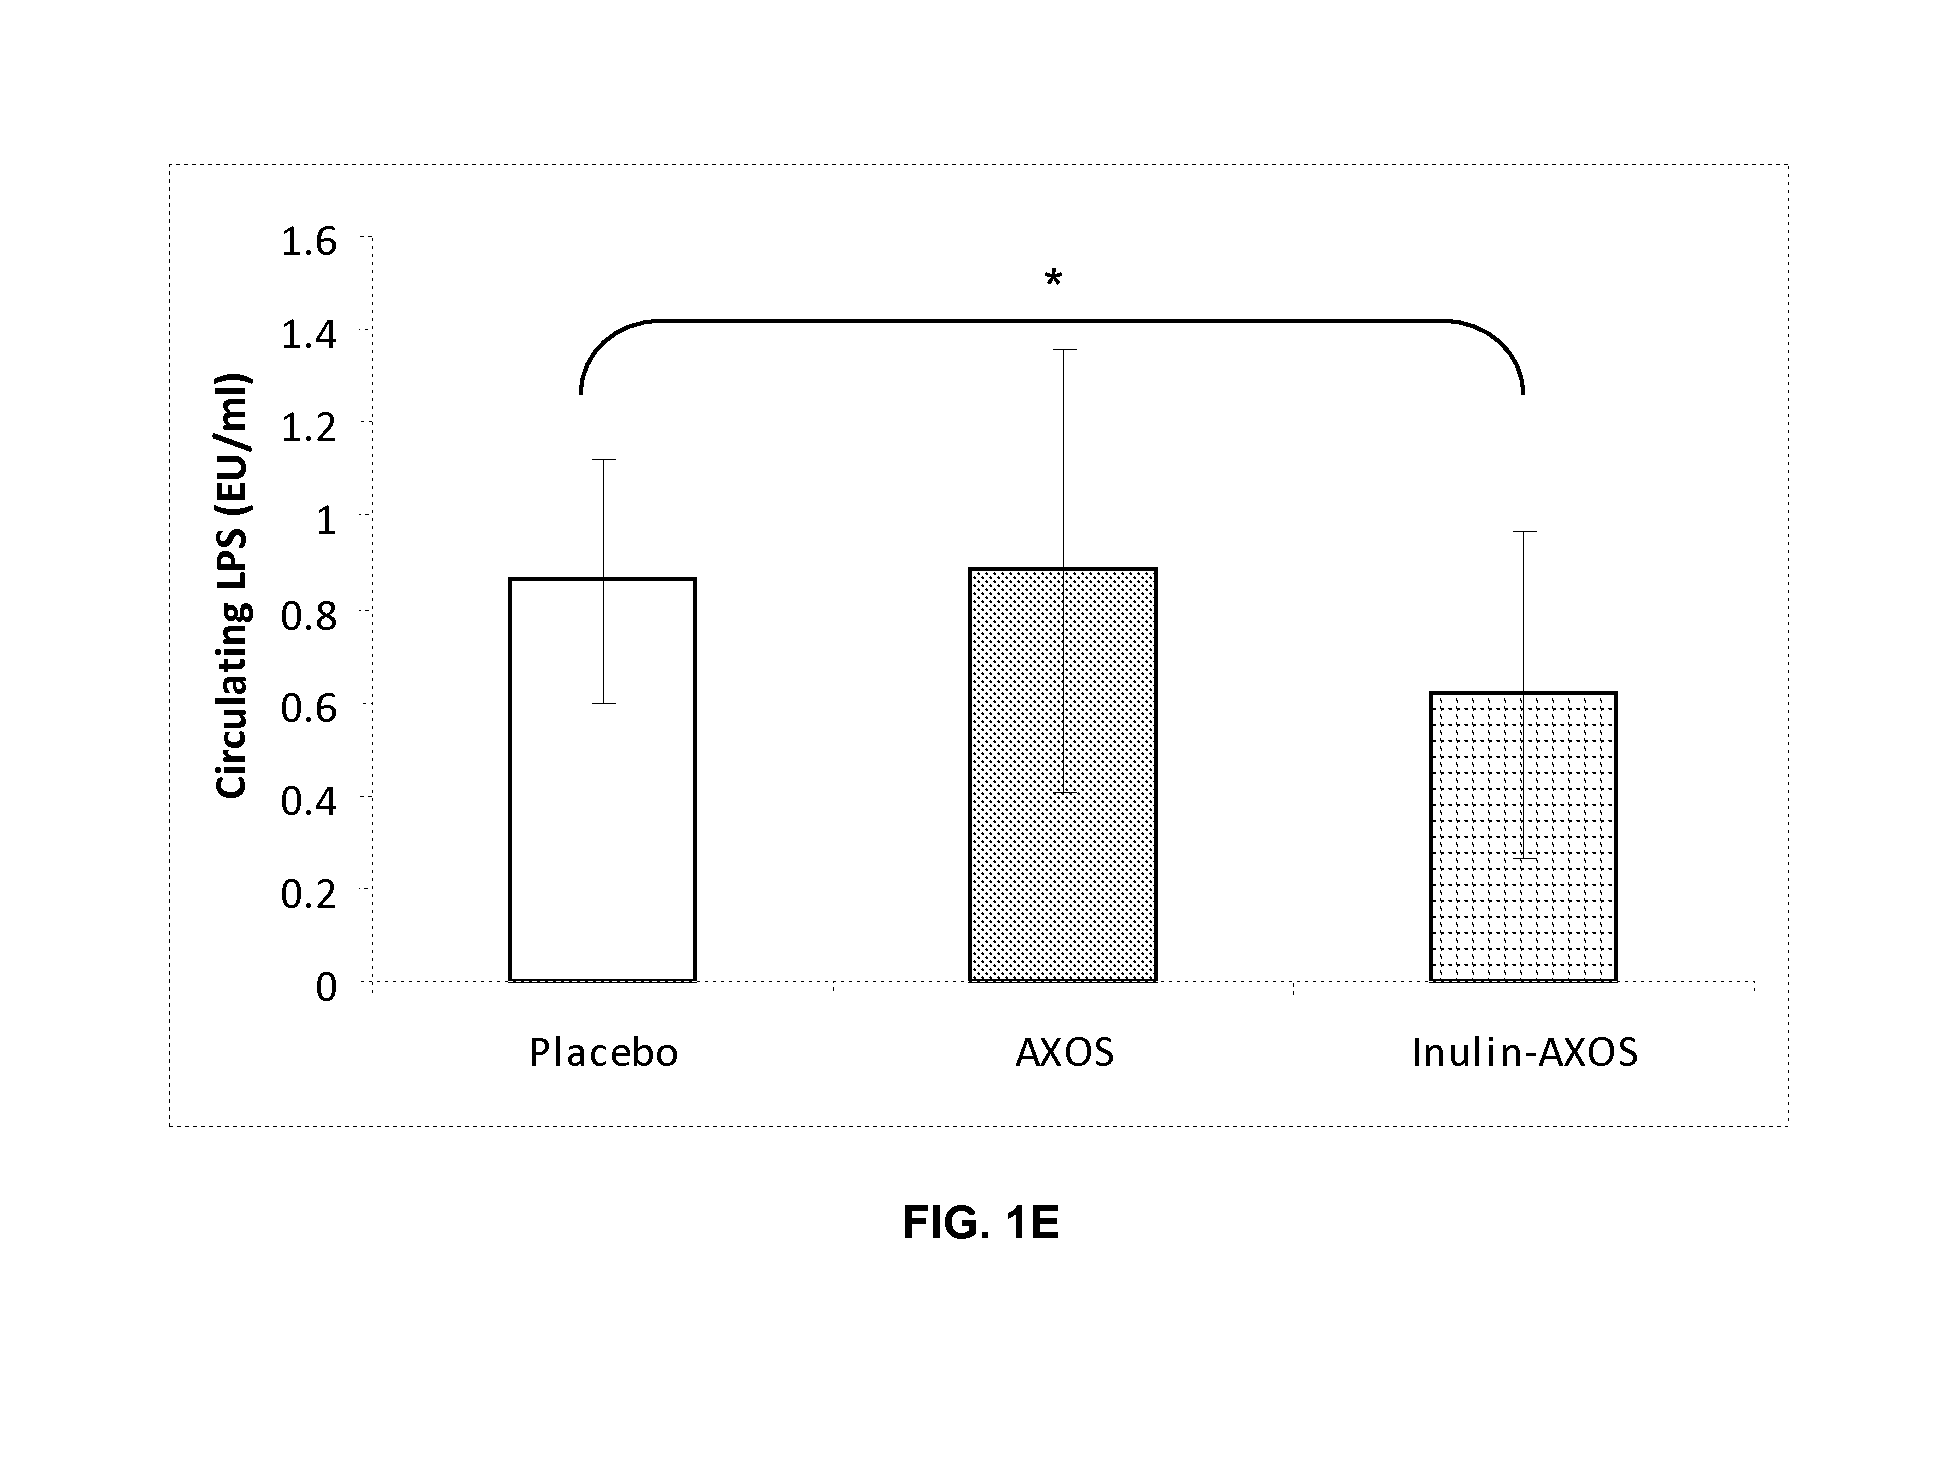 Compositions containing mixtures of fermentable fibers